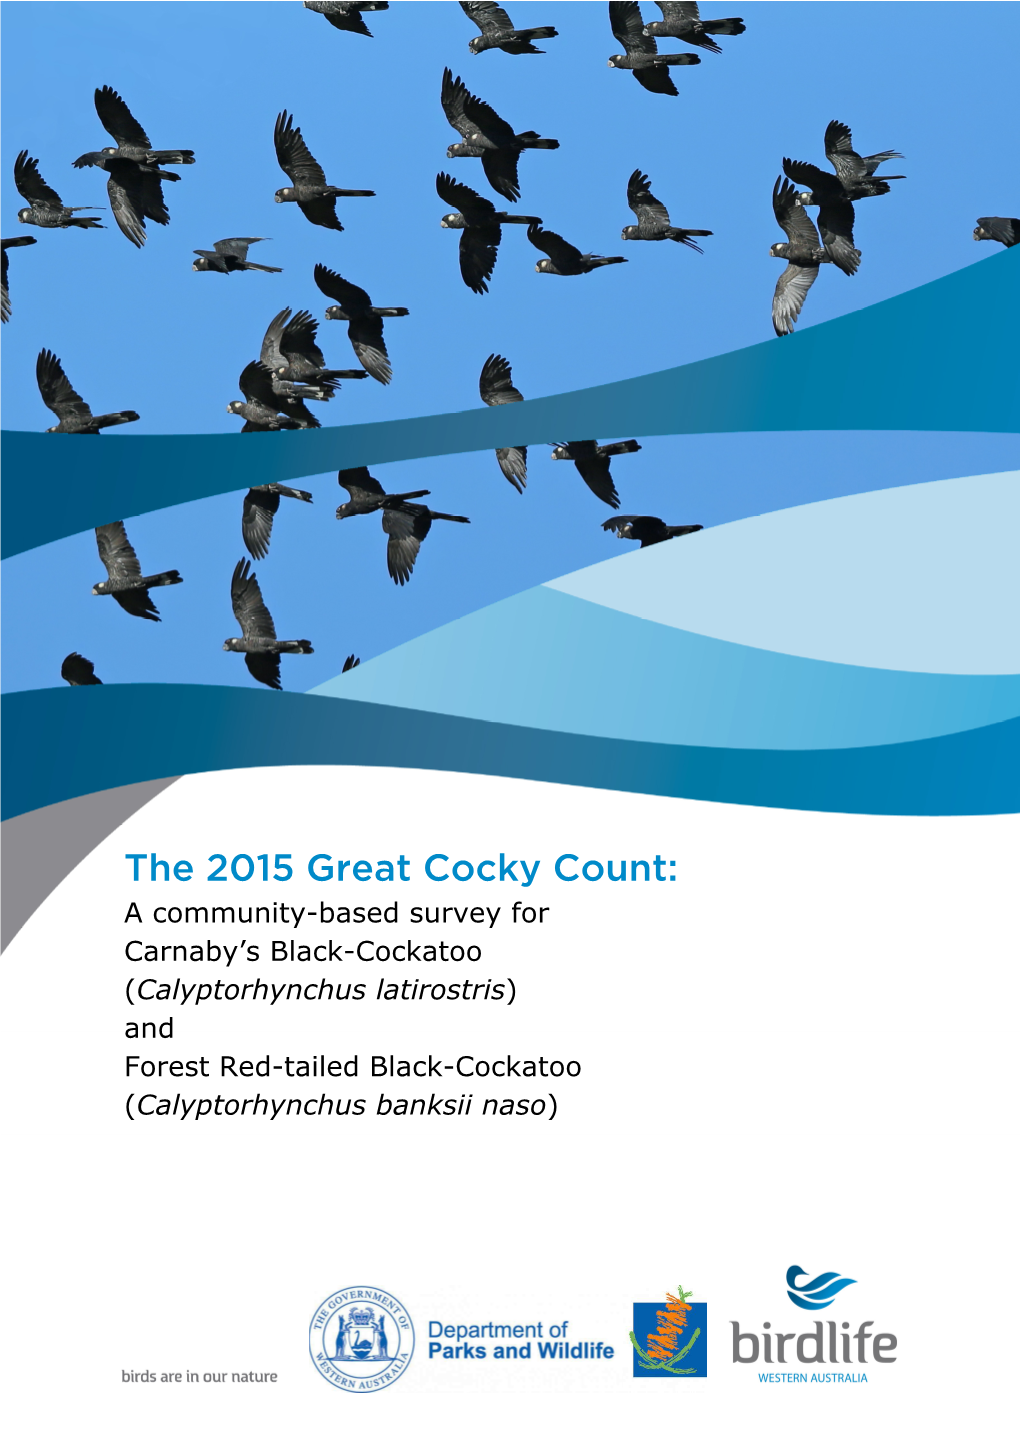 The 2015 Great Cocky Count